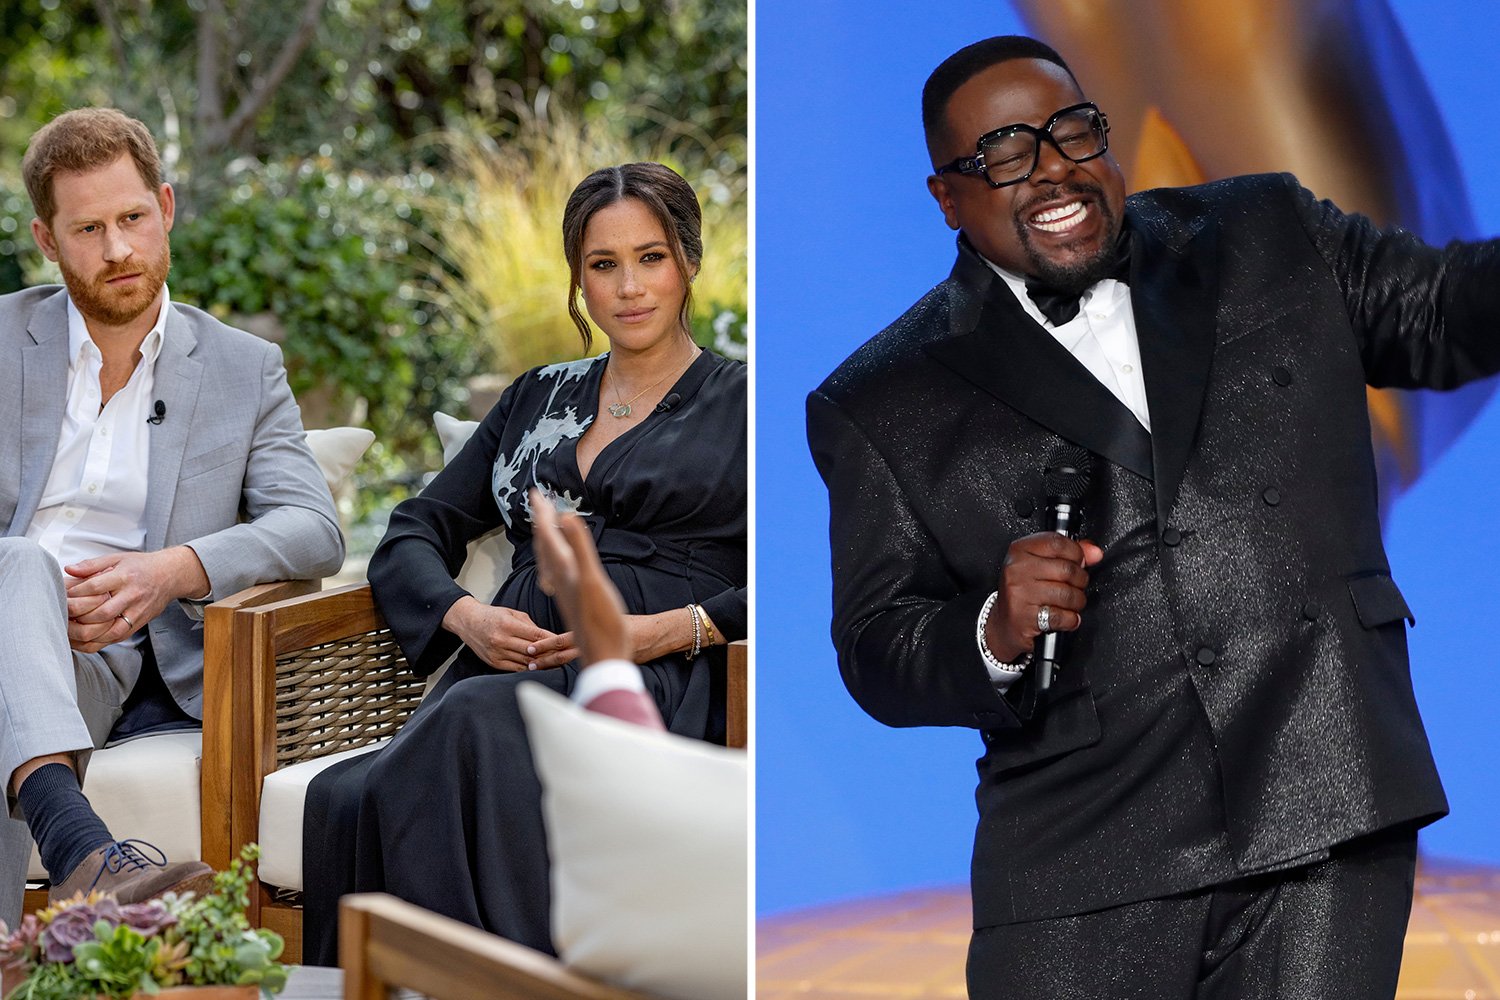 ROYAL BLUSH Emmys 2021 – Prince Harry and Meghan Markle humiliated as Cedric the Entertainer roasts them over Oprah interview